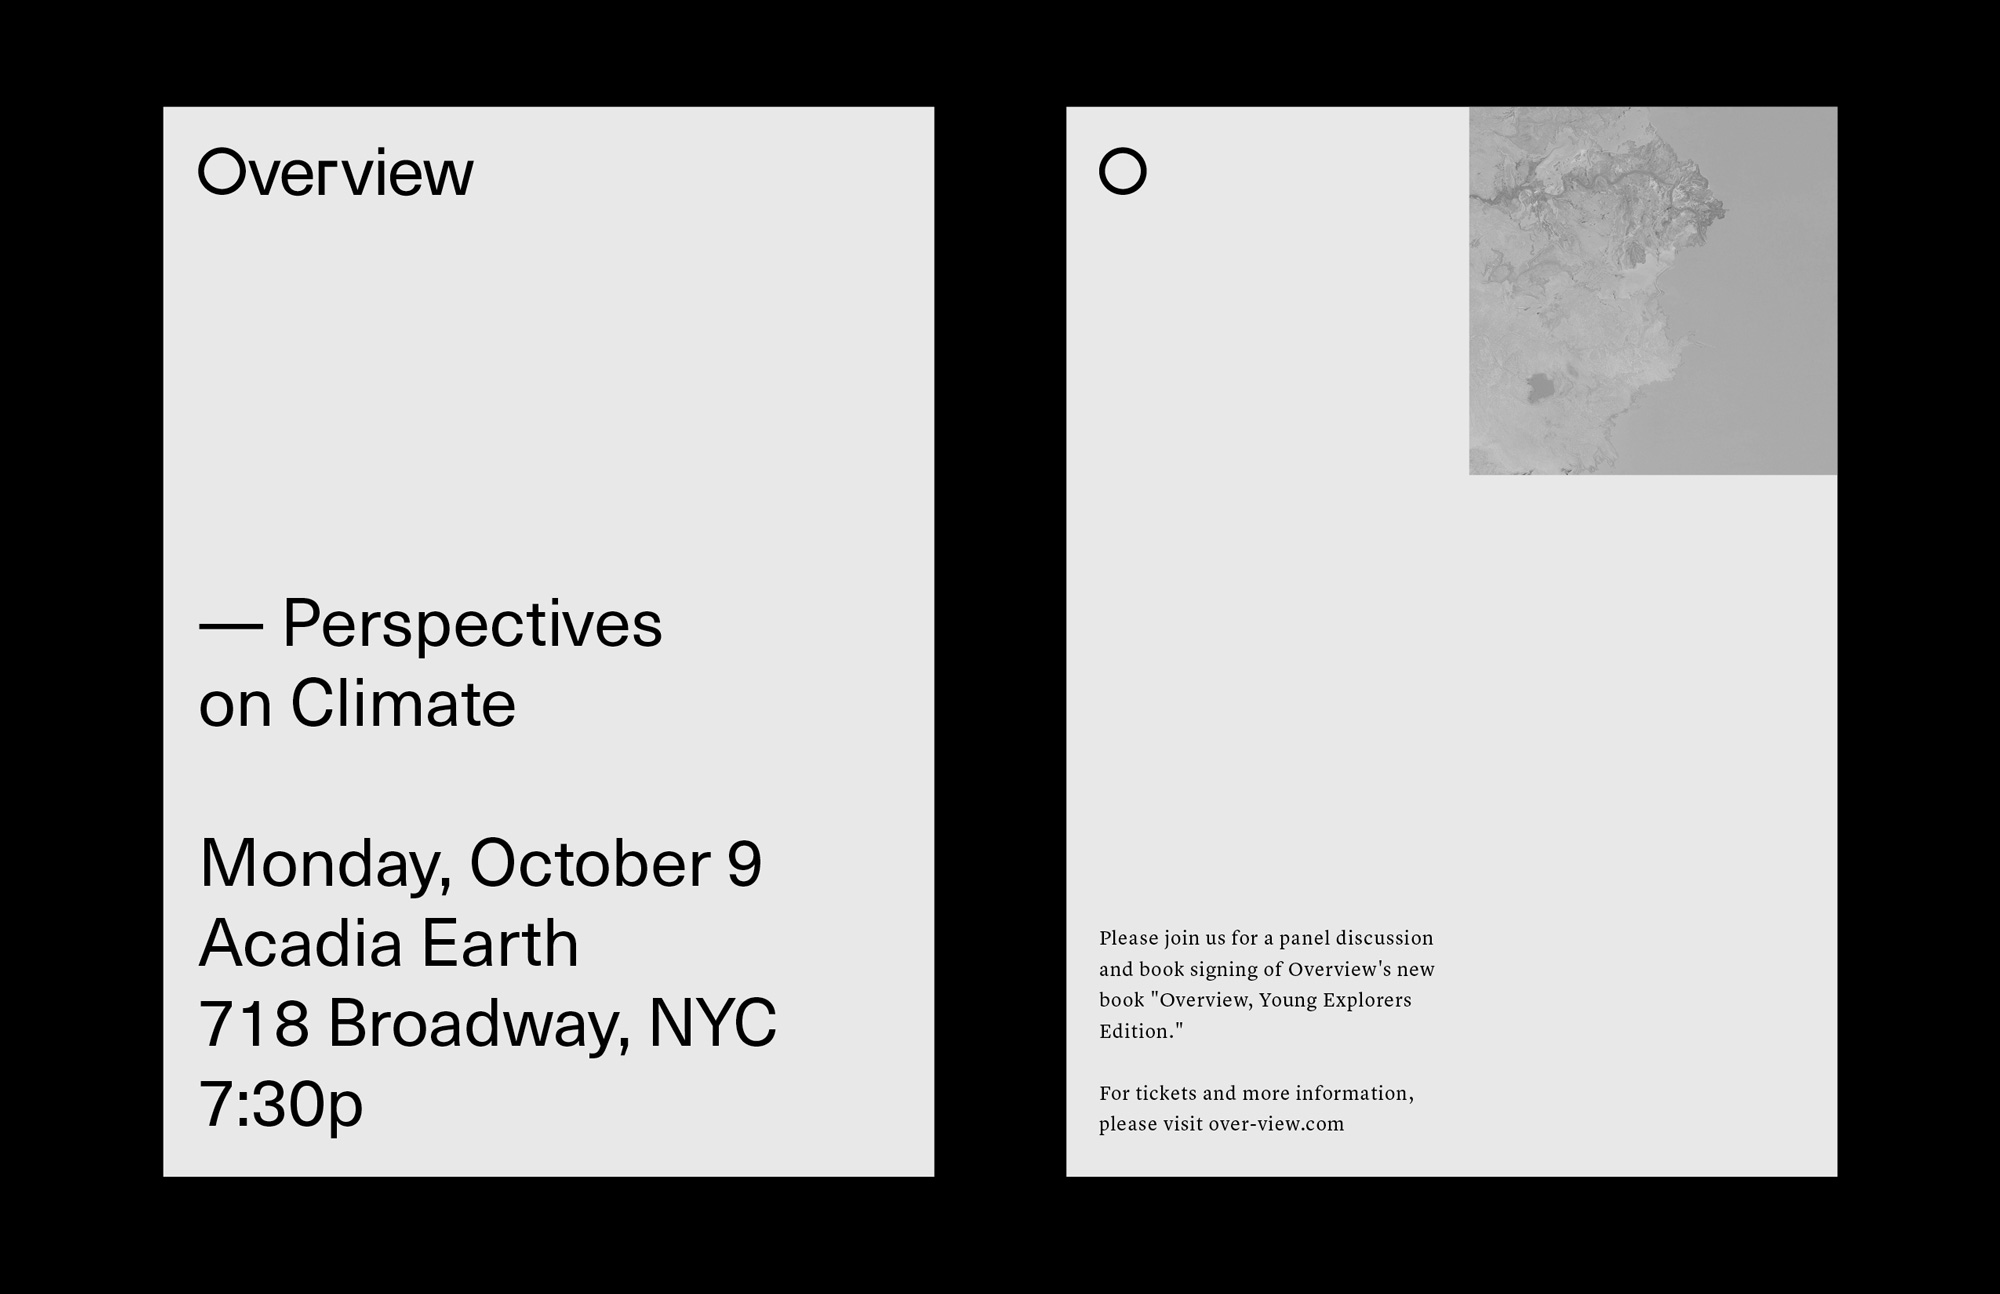 New Logo and Identity for Overview by Ben Bloom